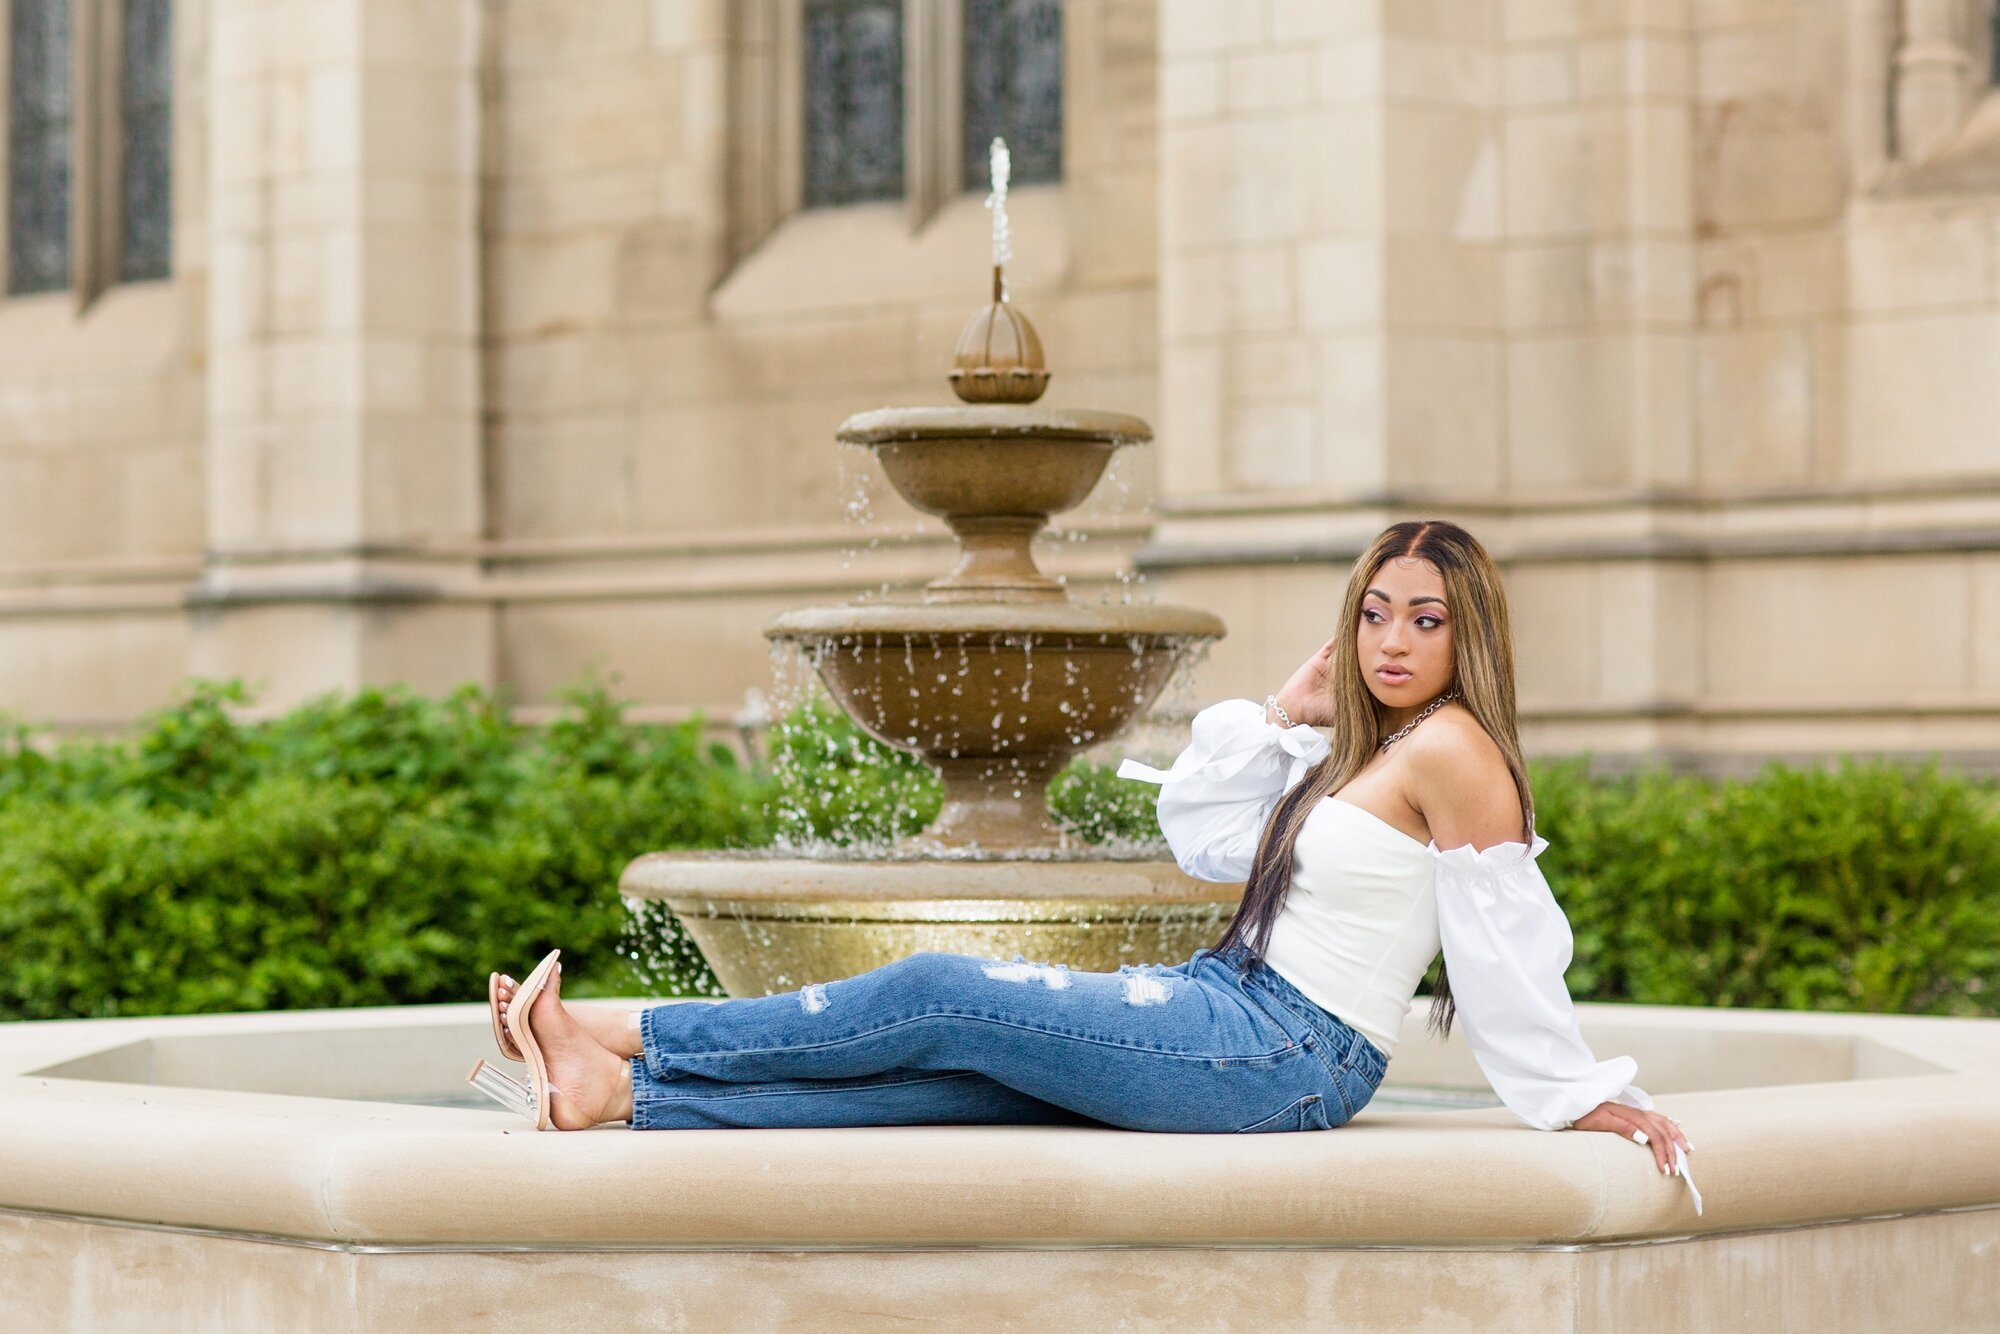 pittsburgh senior photographer, locations for photoshoot pittsburgh, best senior photographer pittsburgh, cranberry township senior photographer